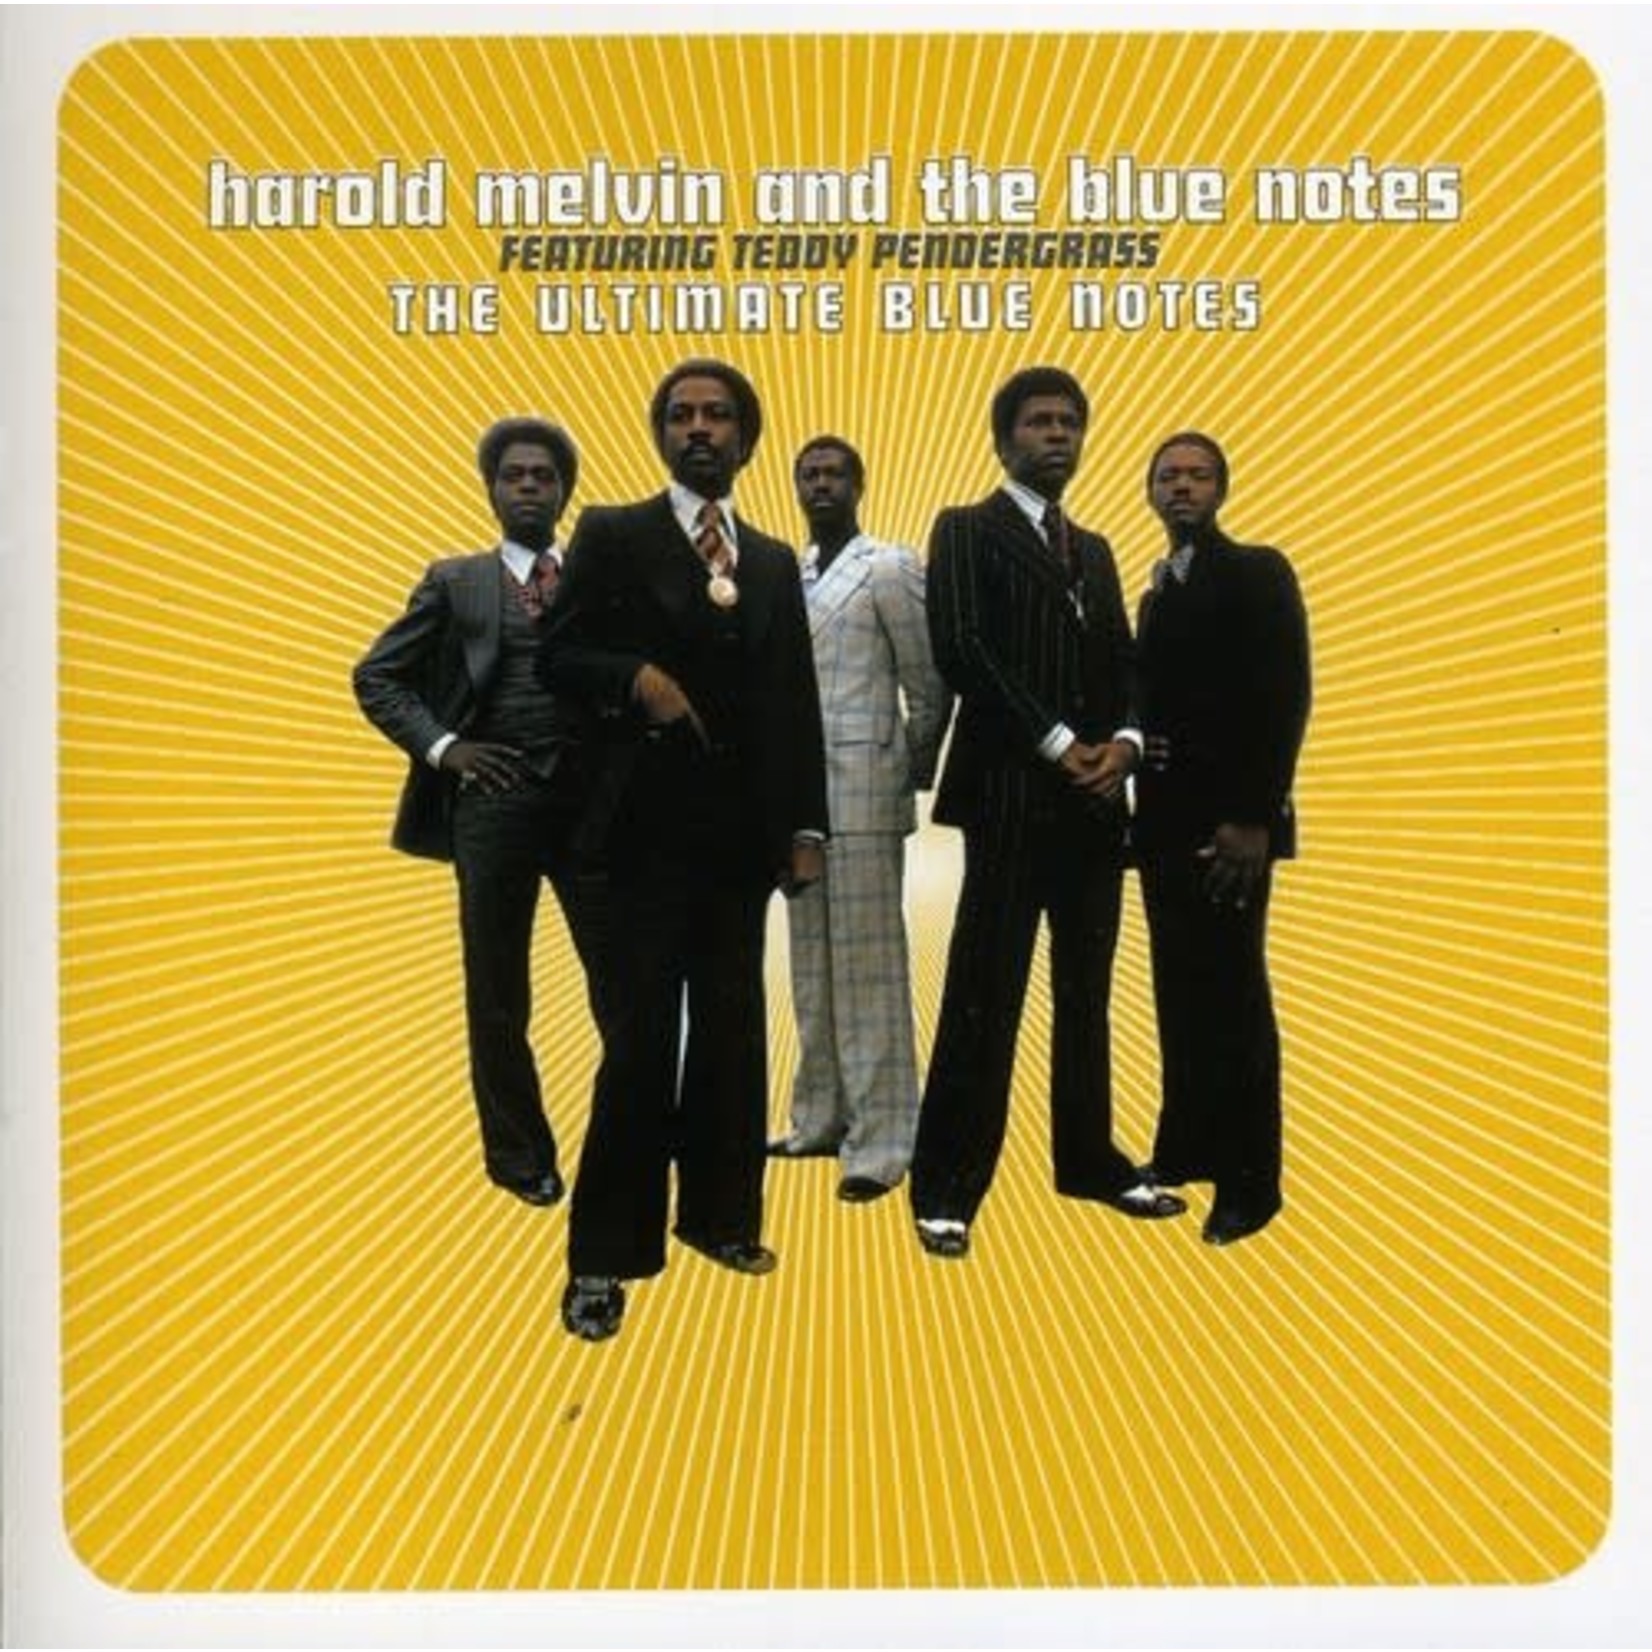 Harold Melvin And The Blue Notes - The Ultimate Blue Notes [CD]